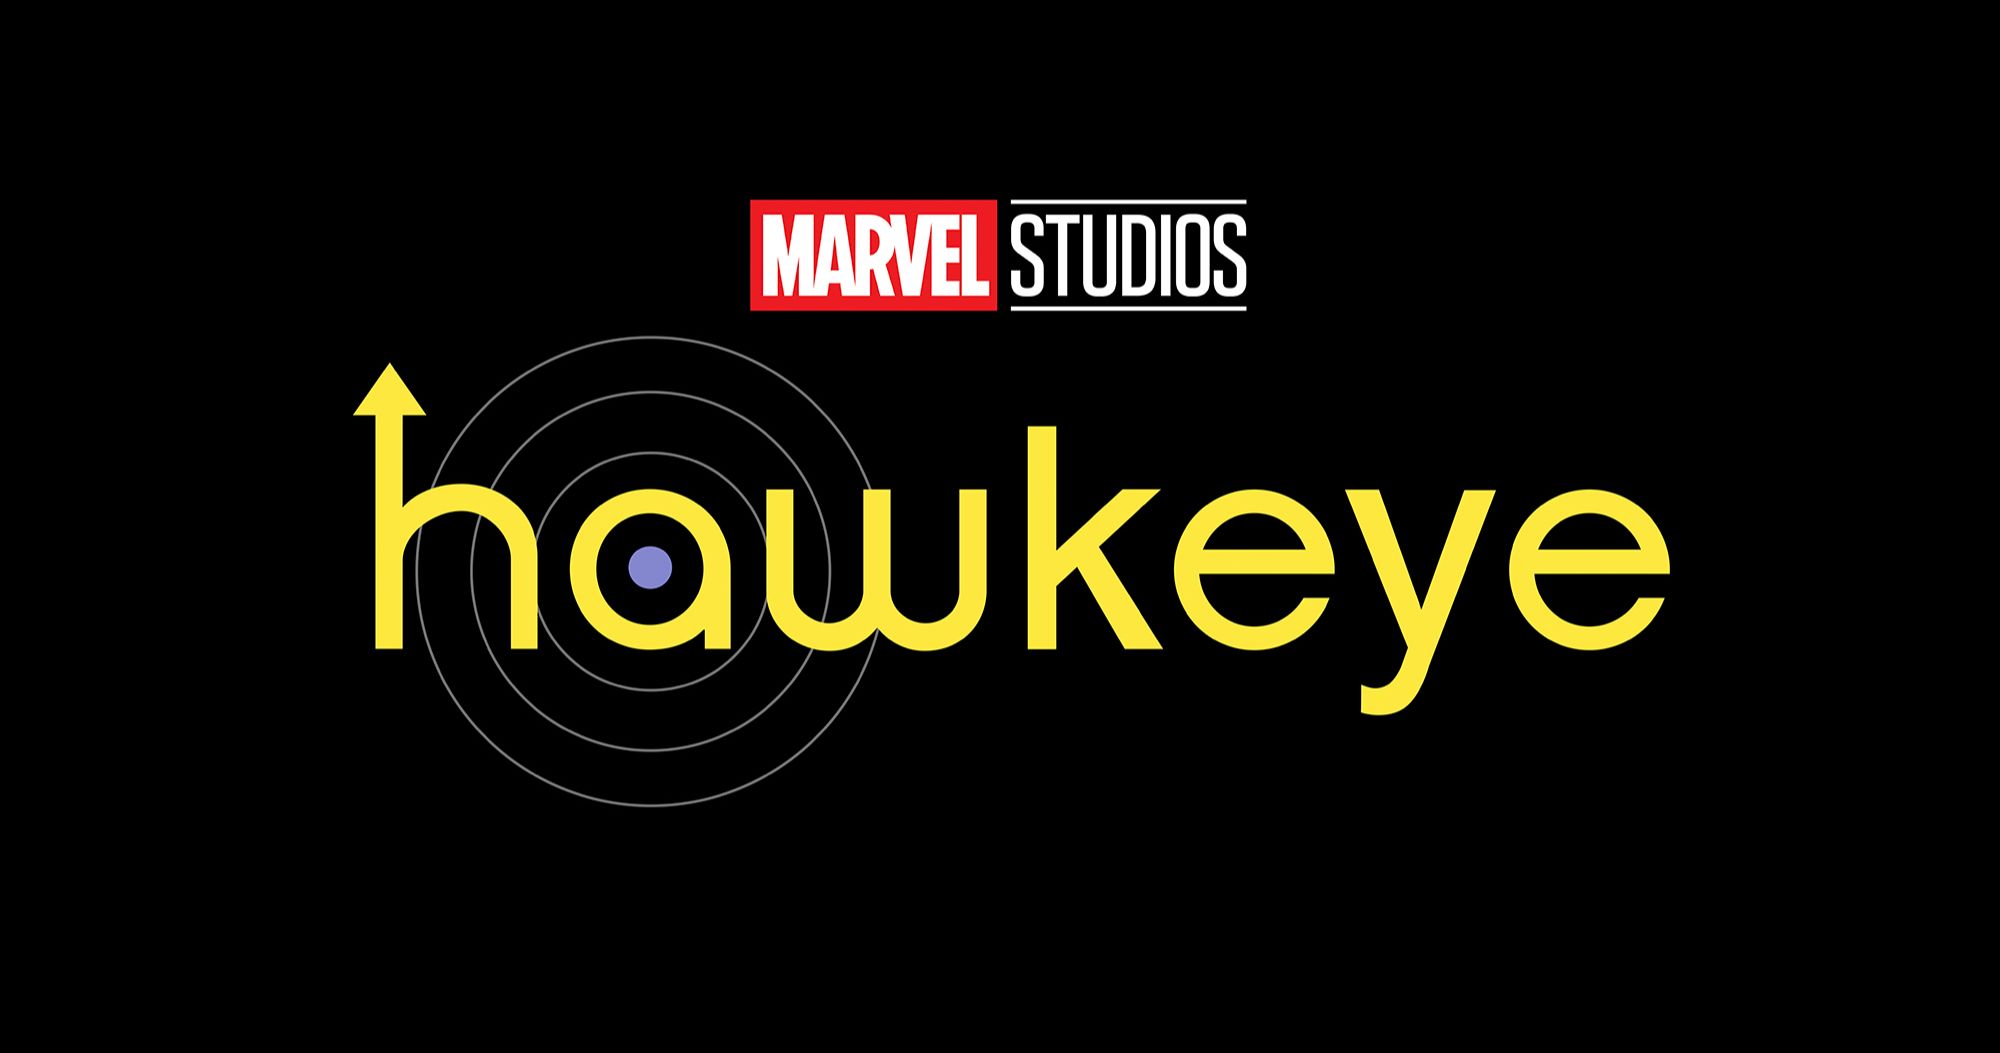 Marvel's Hawkeye Disney+ Series Will Debut in Late 2021, Full Cast Announced